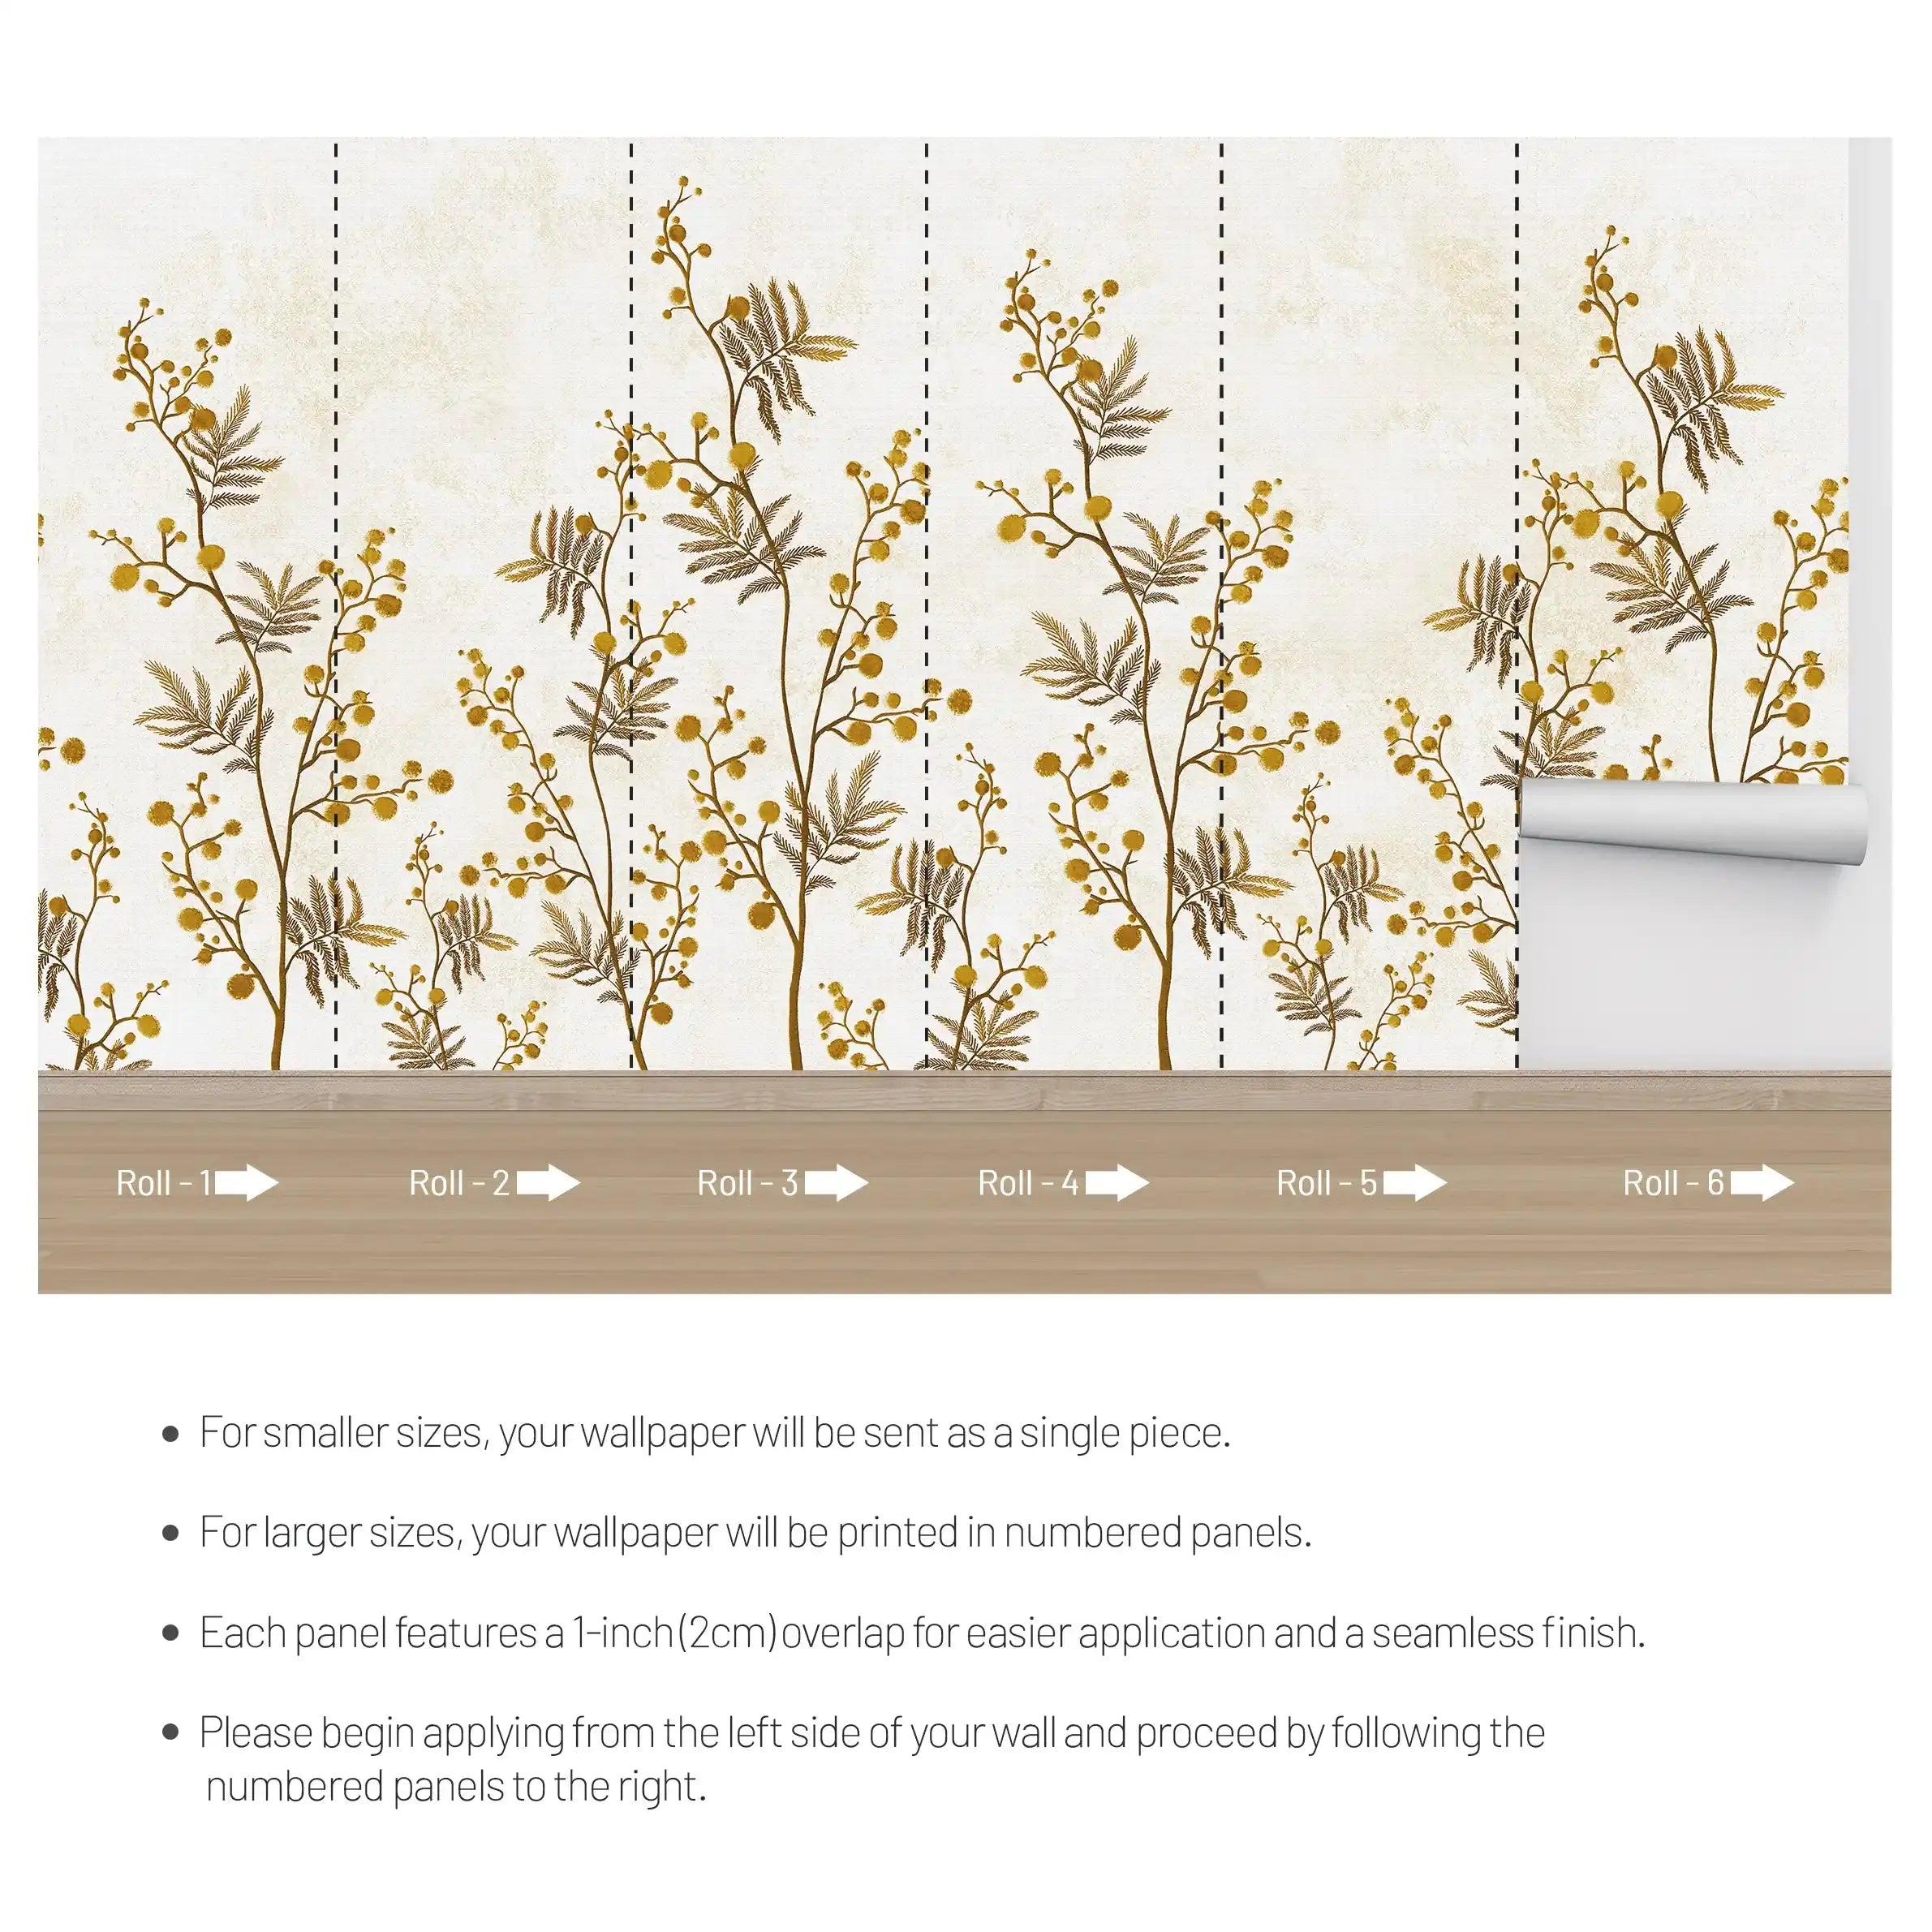 3016-D / Temporary Wallpaper: Floral Wall Mural with Easy Peel Off Design, Ideal for Accent Walls and Shelf Drawers - Artevella